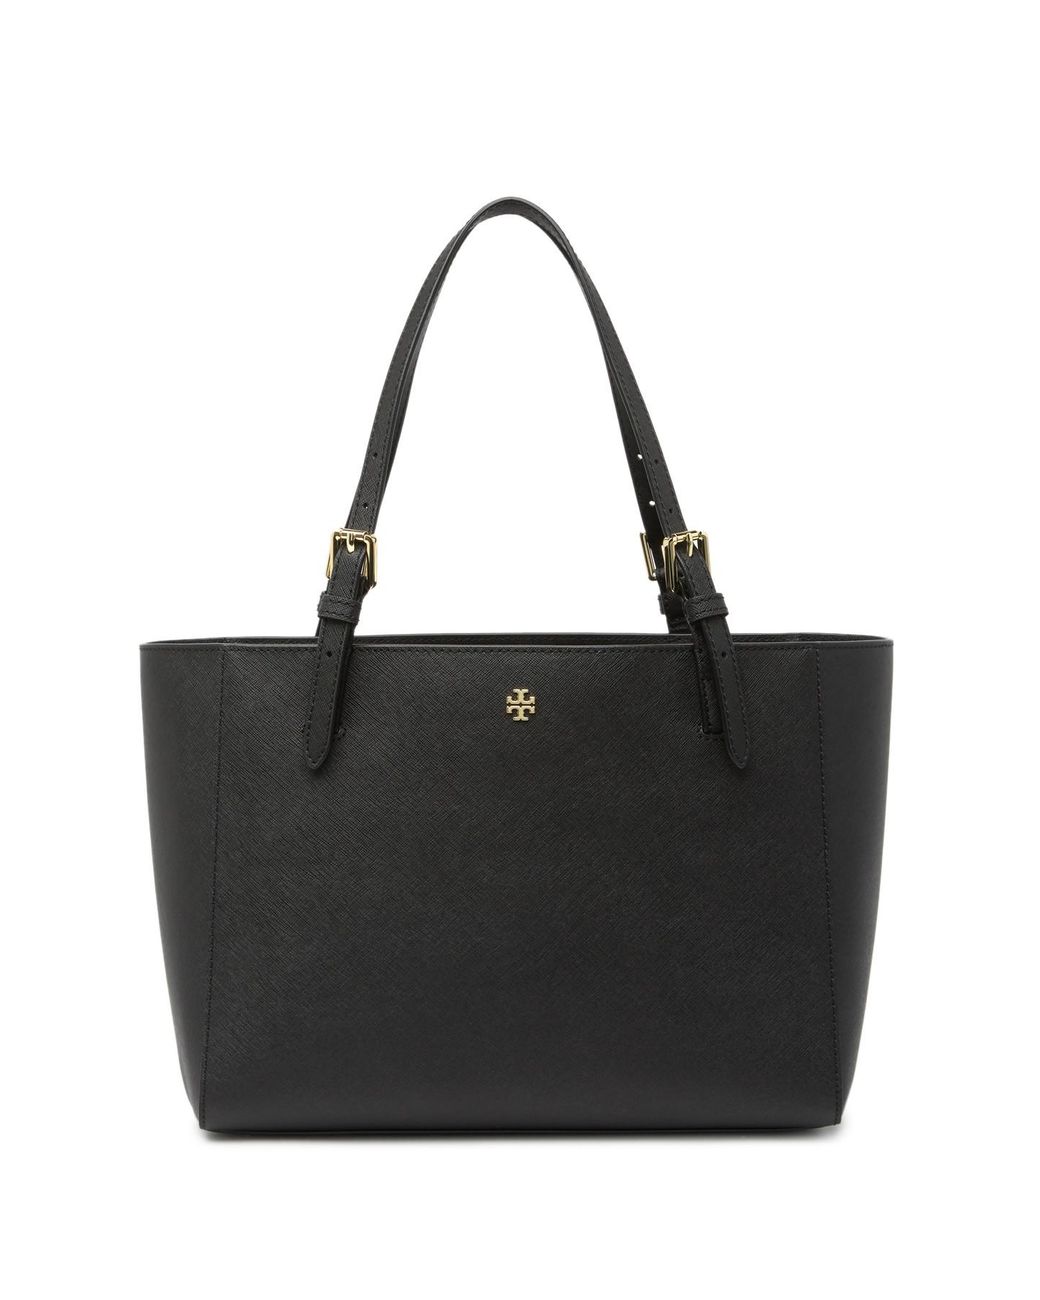 Tory Burch Emerson Small Saffiano Leather Buckle Tote in Black | Lyst